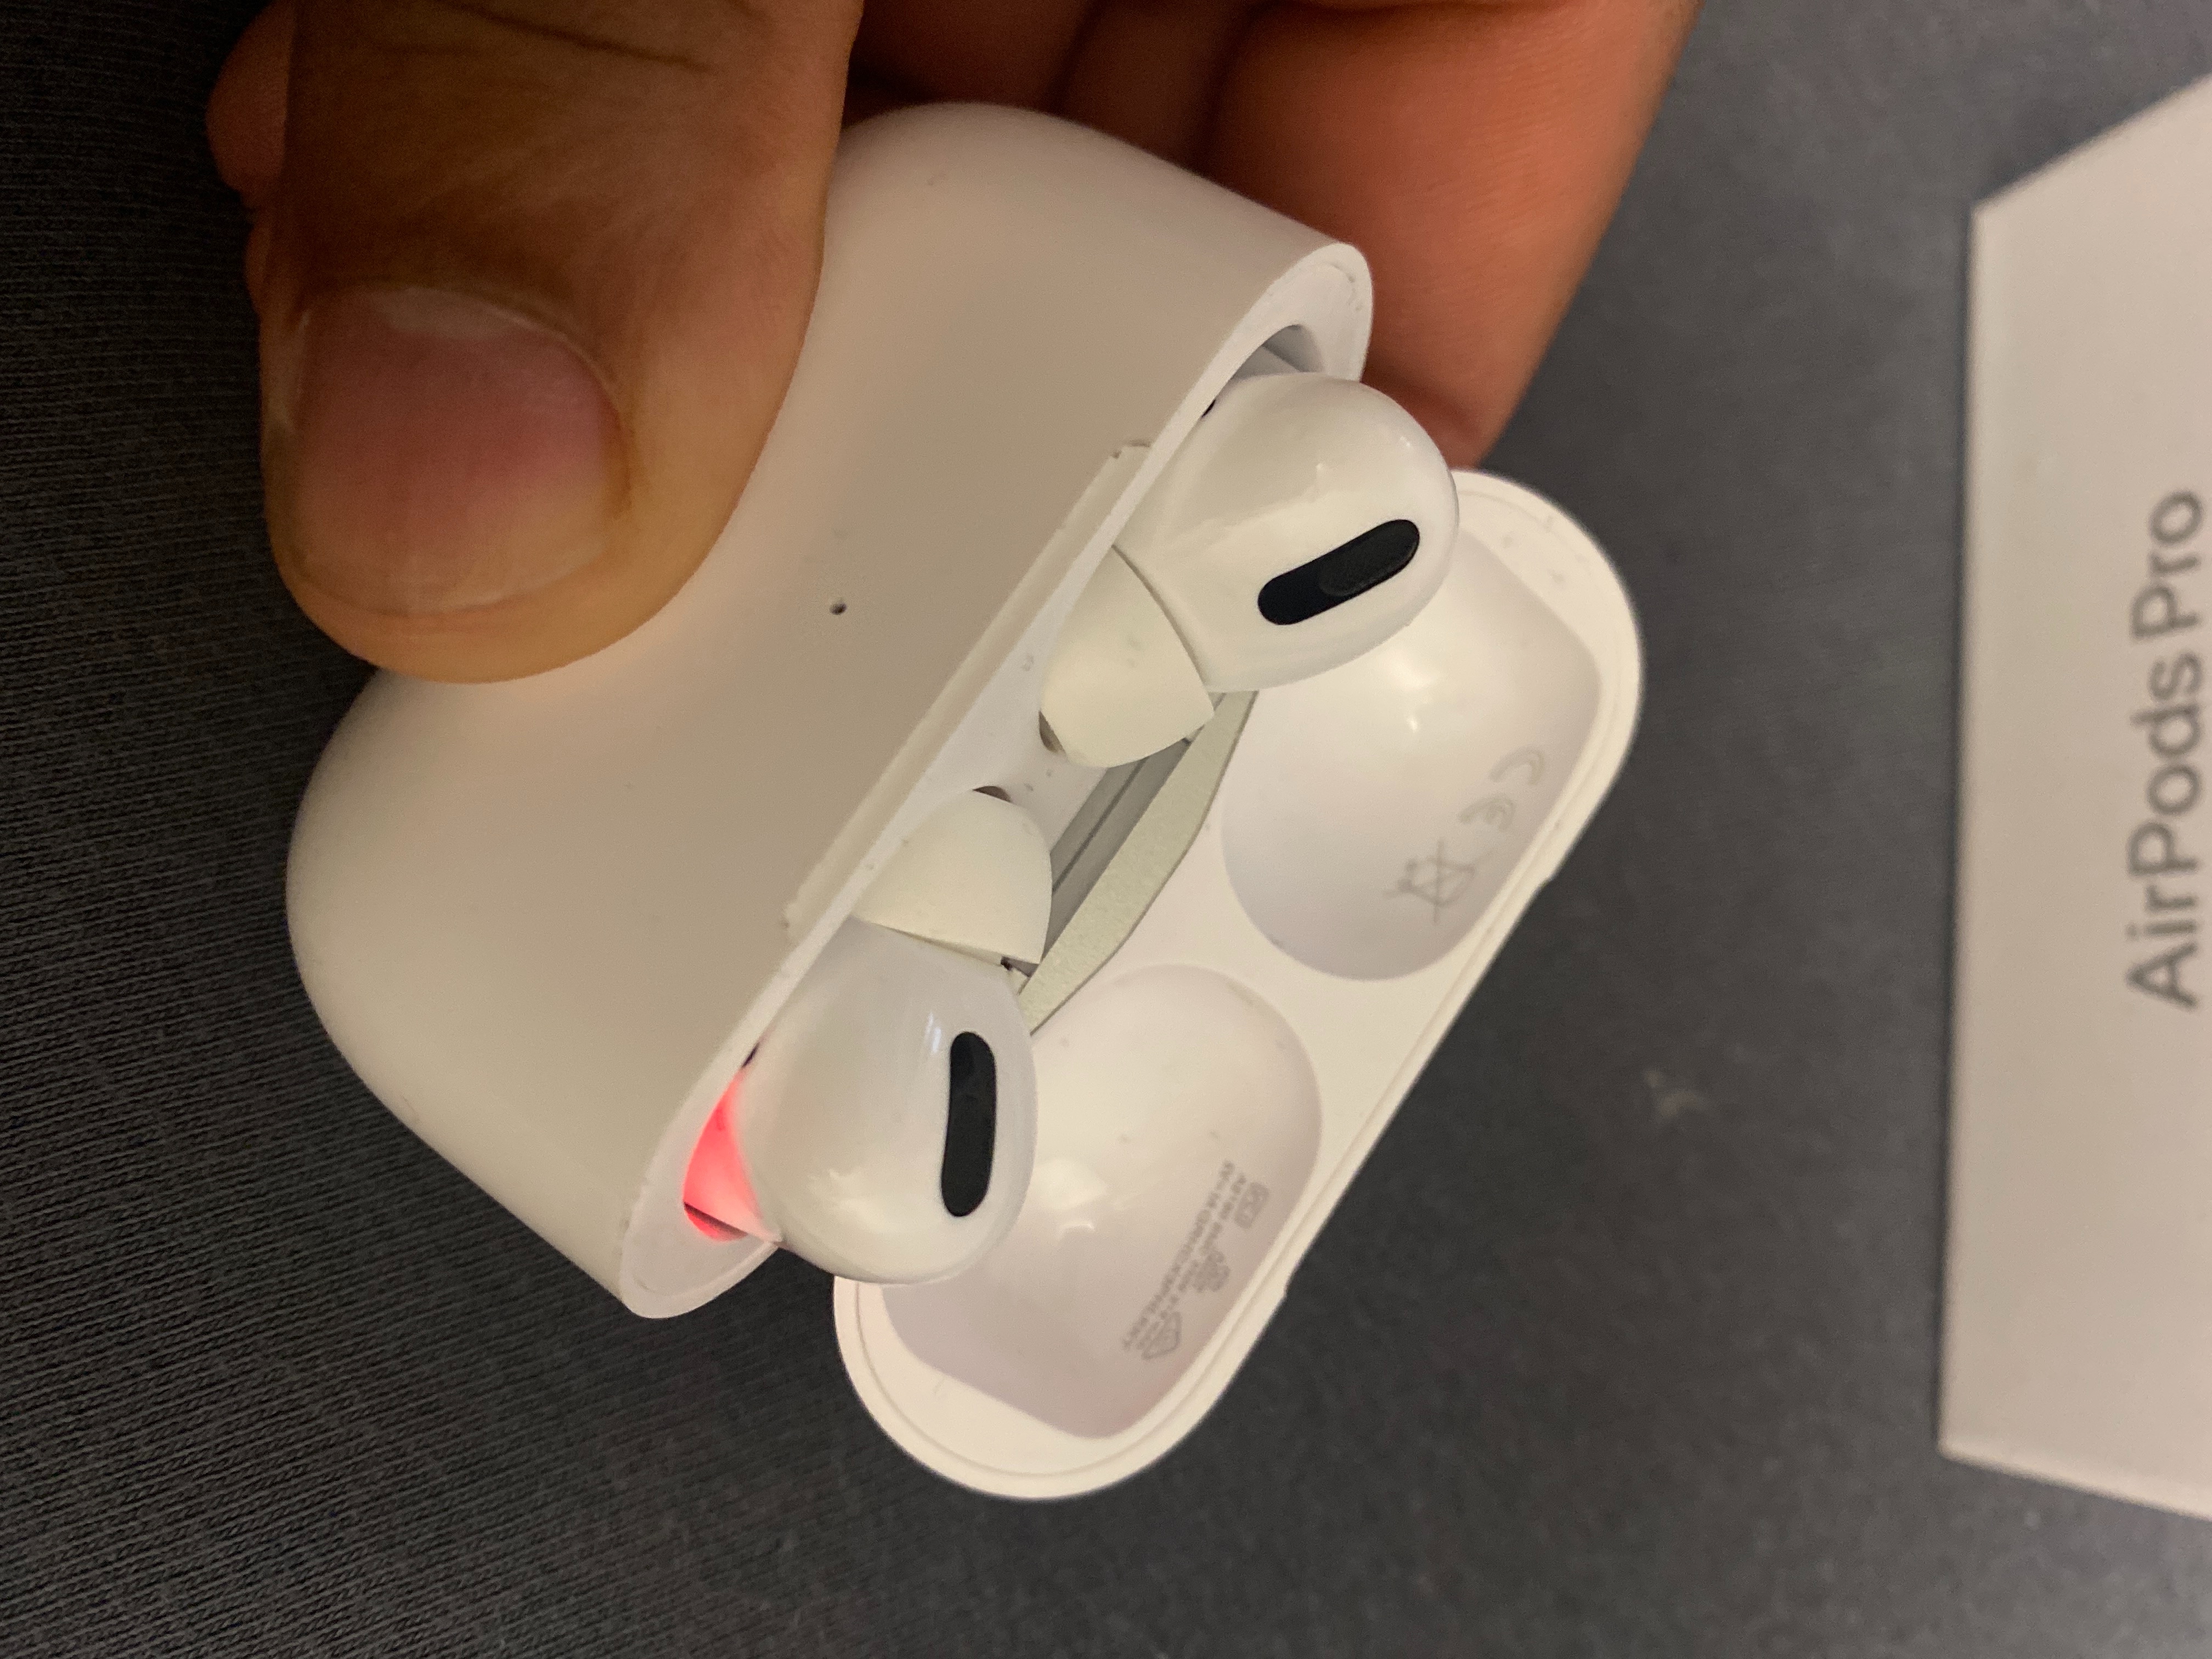 connecting airpods Pro. - Apple Community